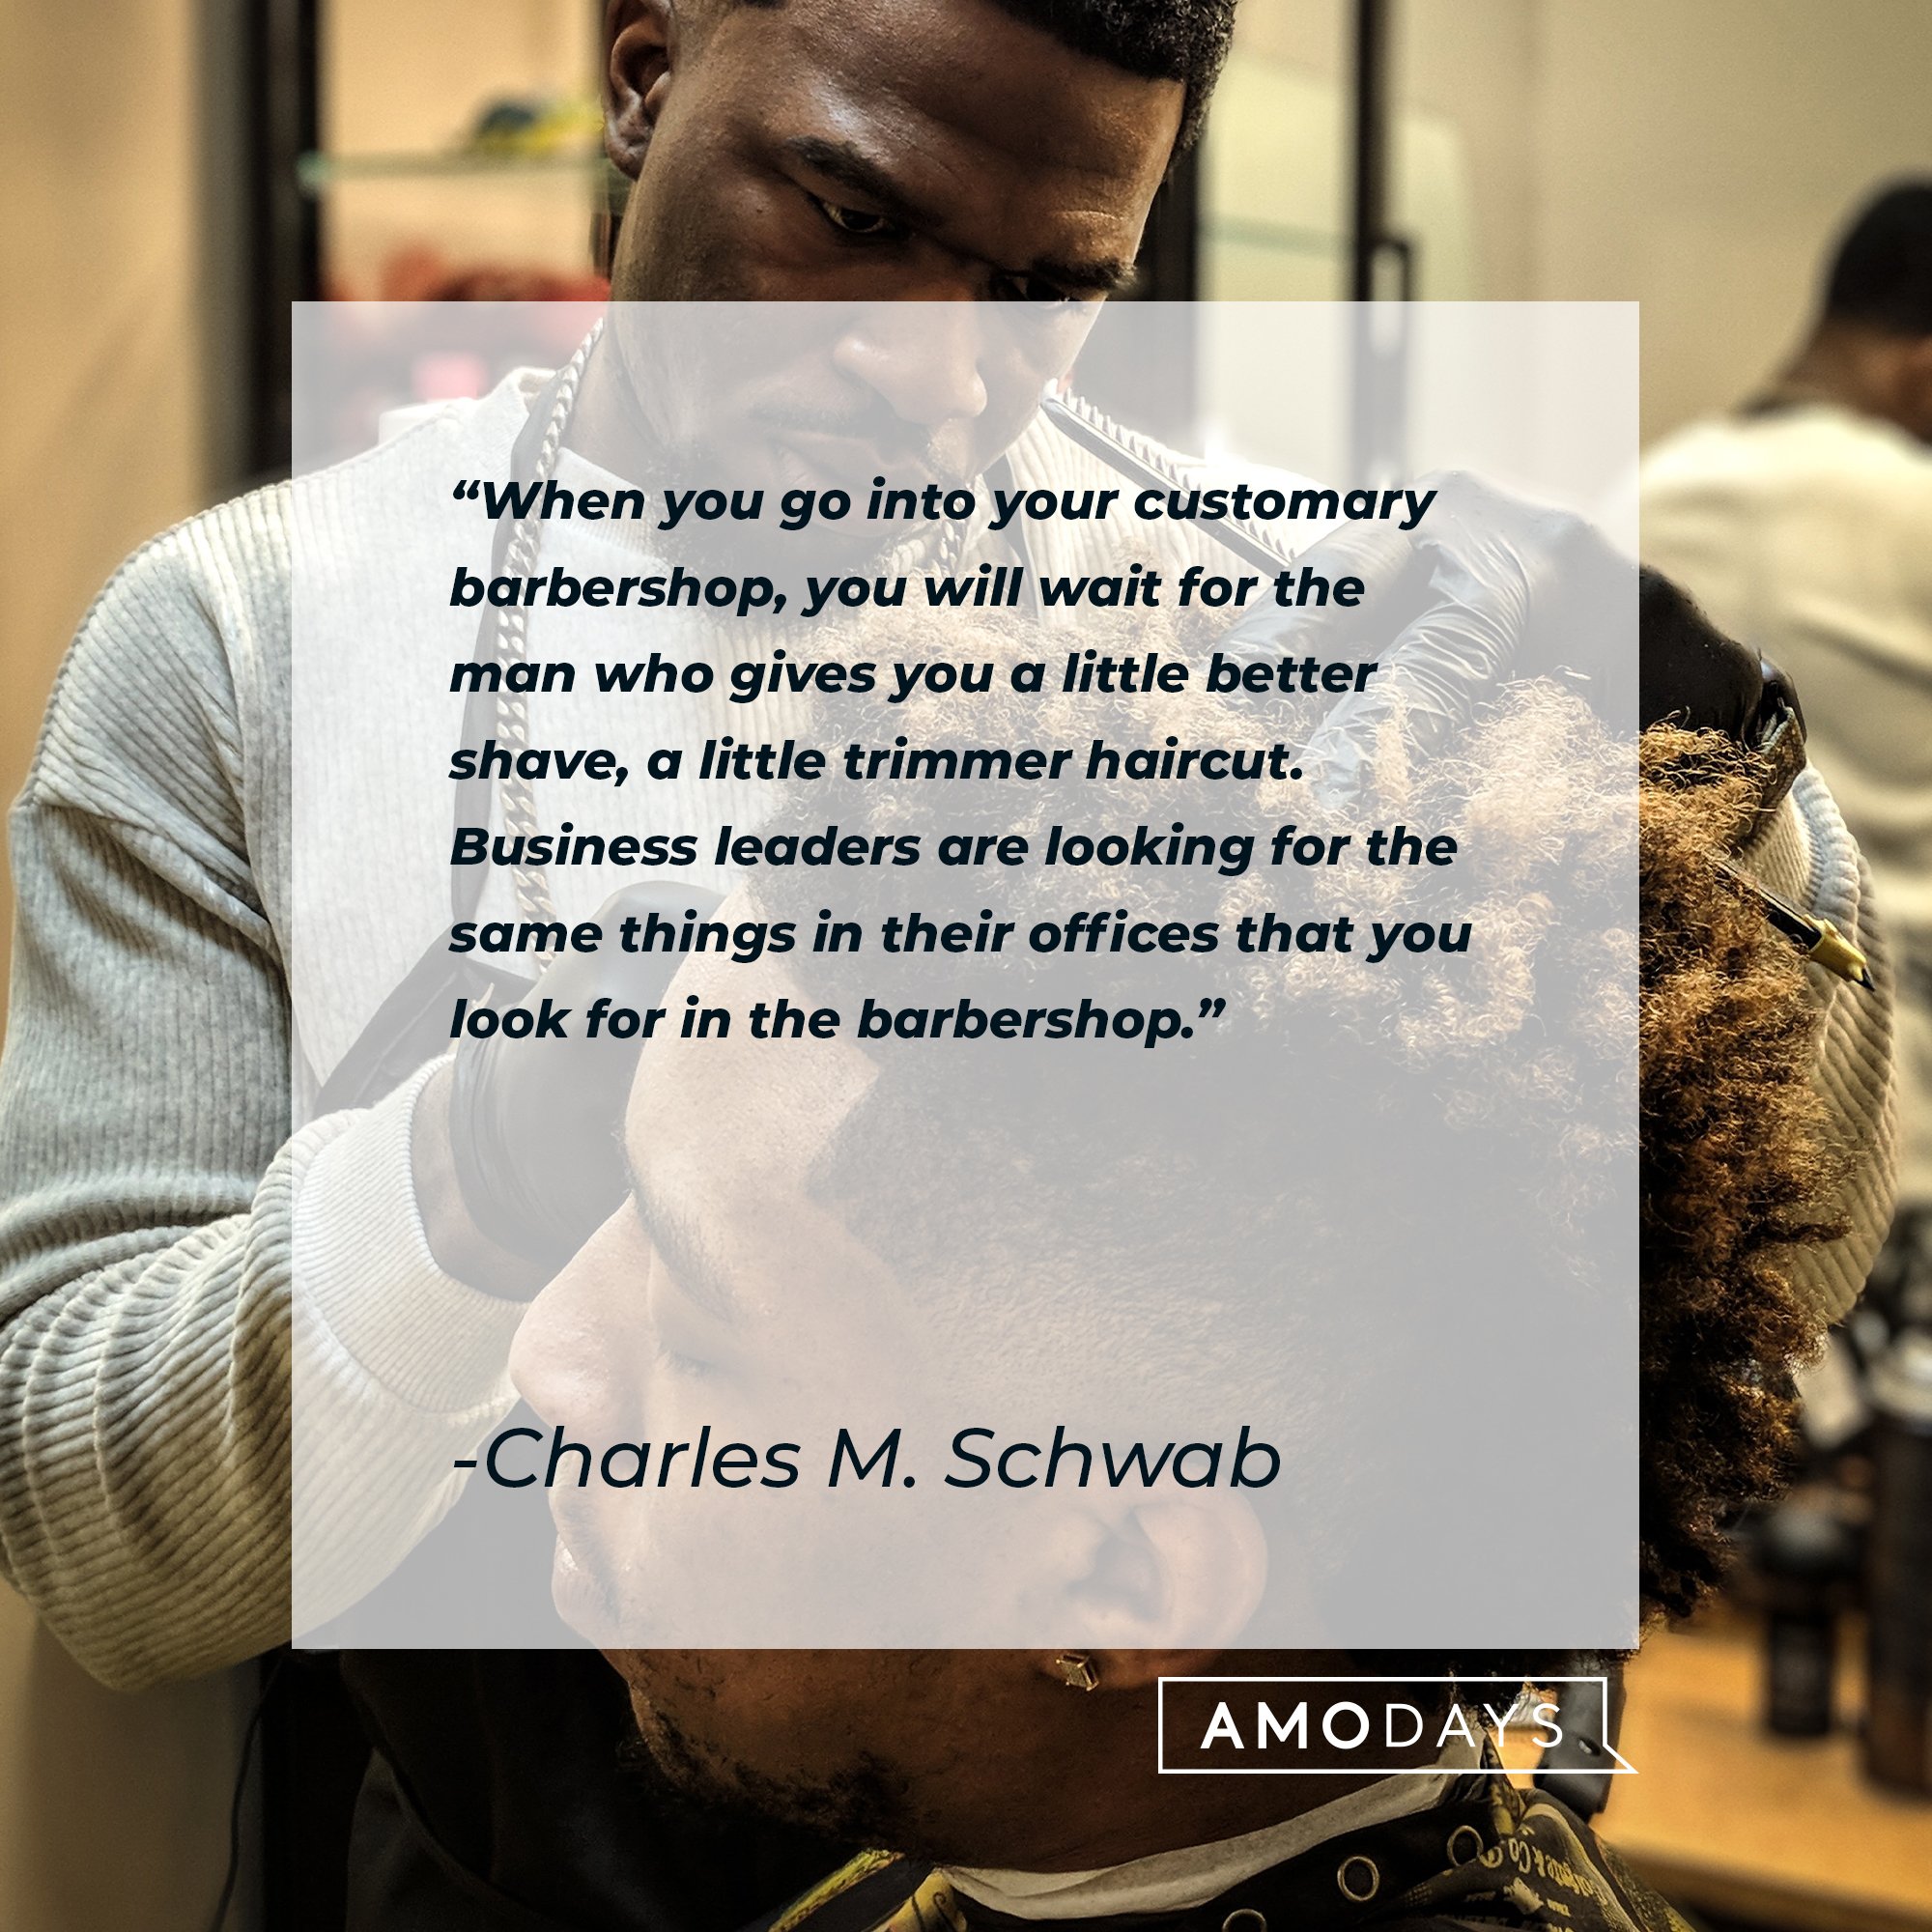 Charles M. Schwab's quote: "When you go into your customary barbershop, you will wait for the man who gives you a little better shave, a little trimmer haircut. Business leaders are looking for the same things in their offices that you look for in the barbershop." | Image: AmoDays